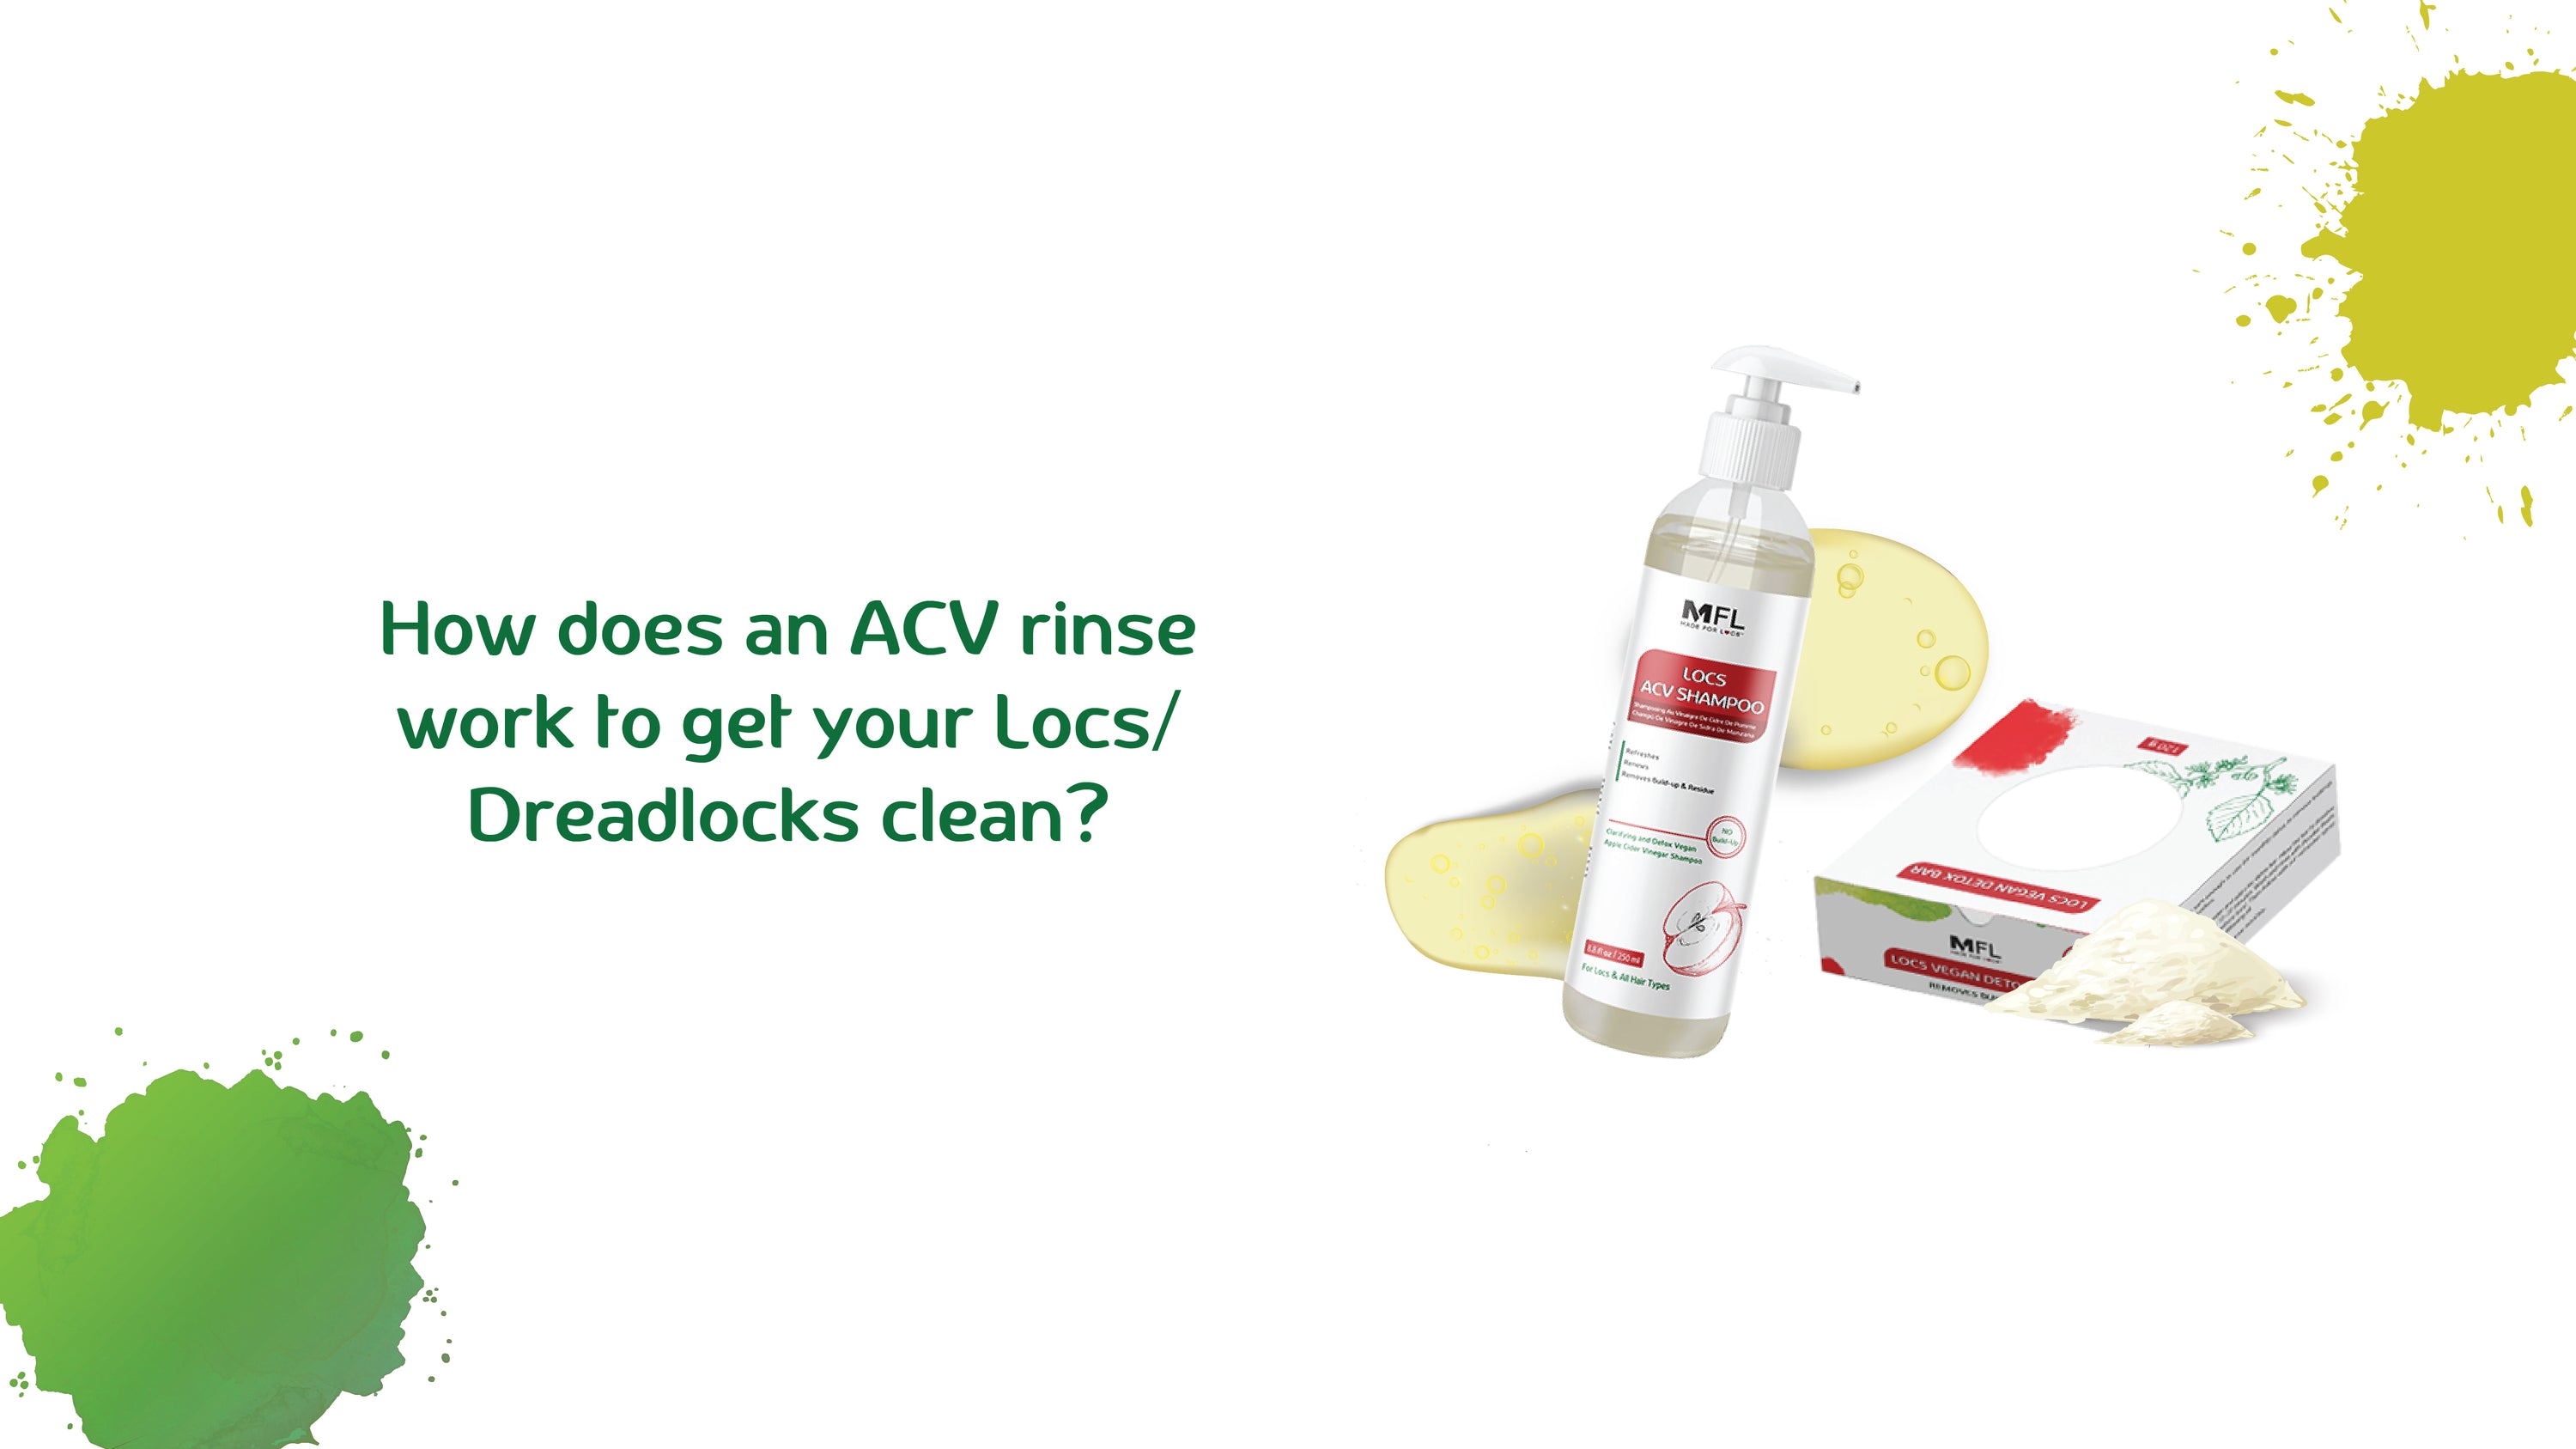 How Does An ACV Rinse Work To Get Your Locs/Dreadlocks Clean?